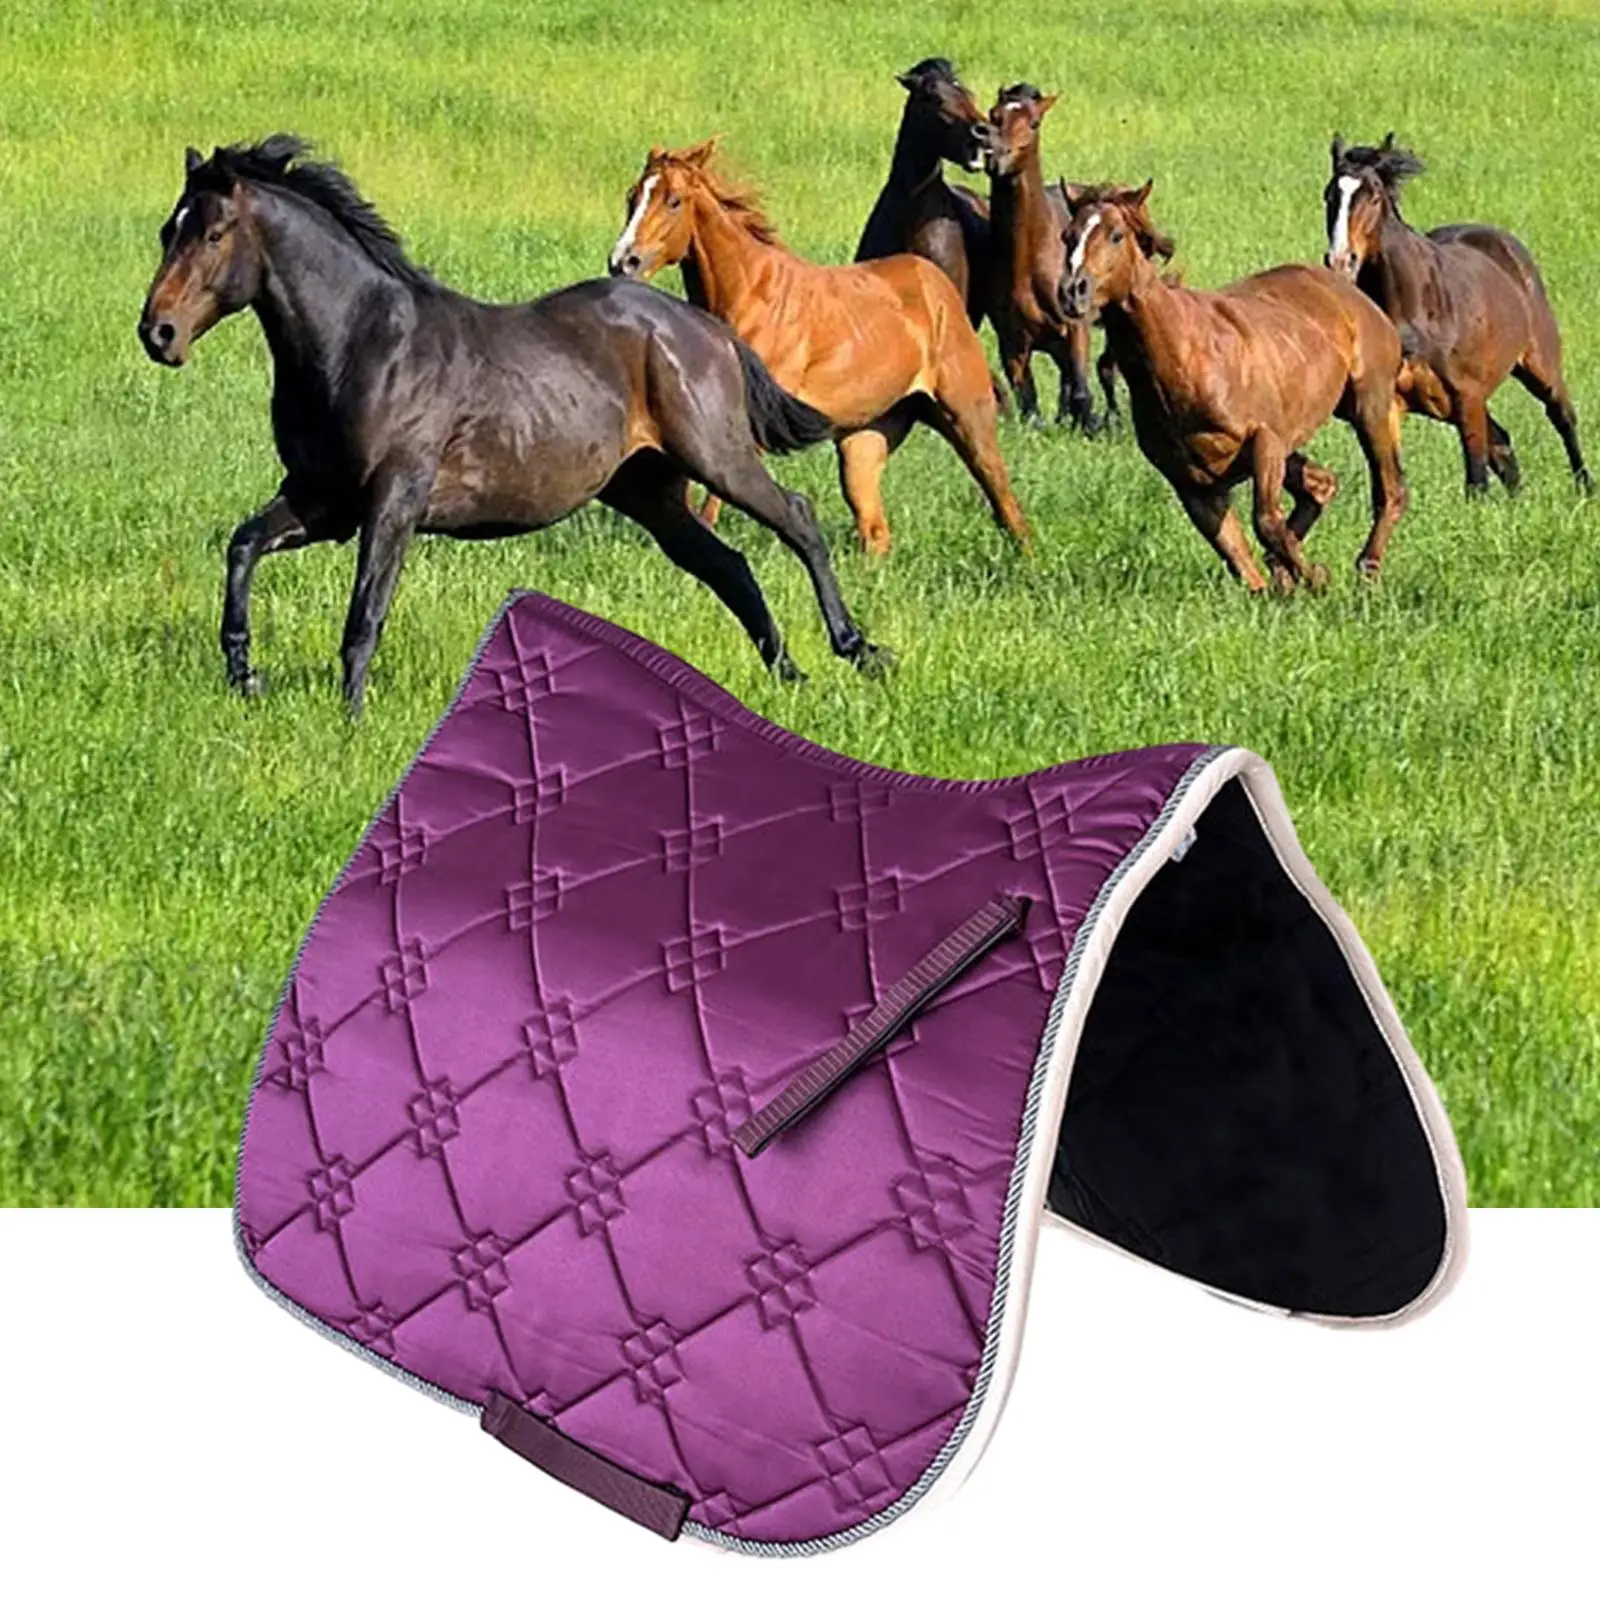 Horse Saddle Pad Equestrian Riding Equipment Breathable Protection Sports Padding Accessories Portable Saddle Shock Pad